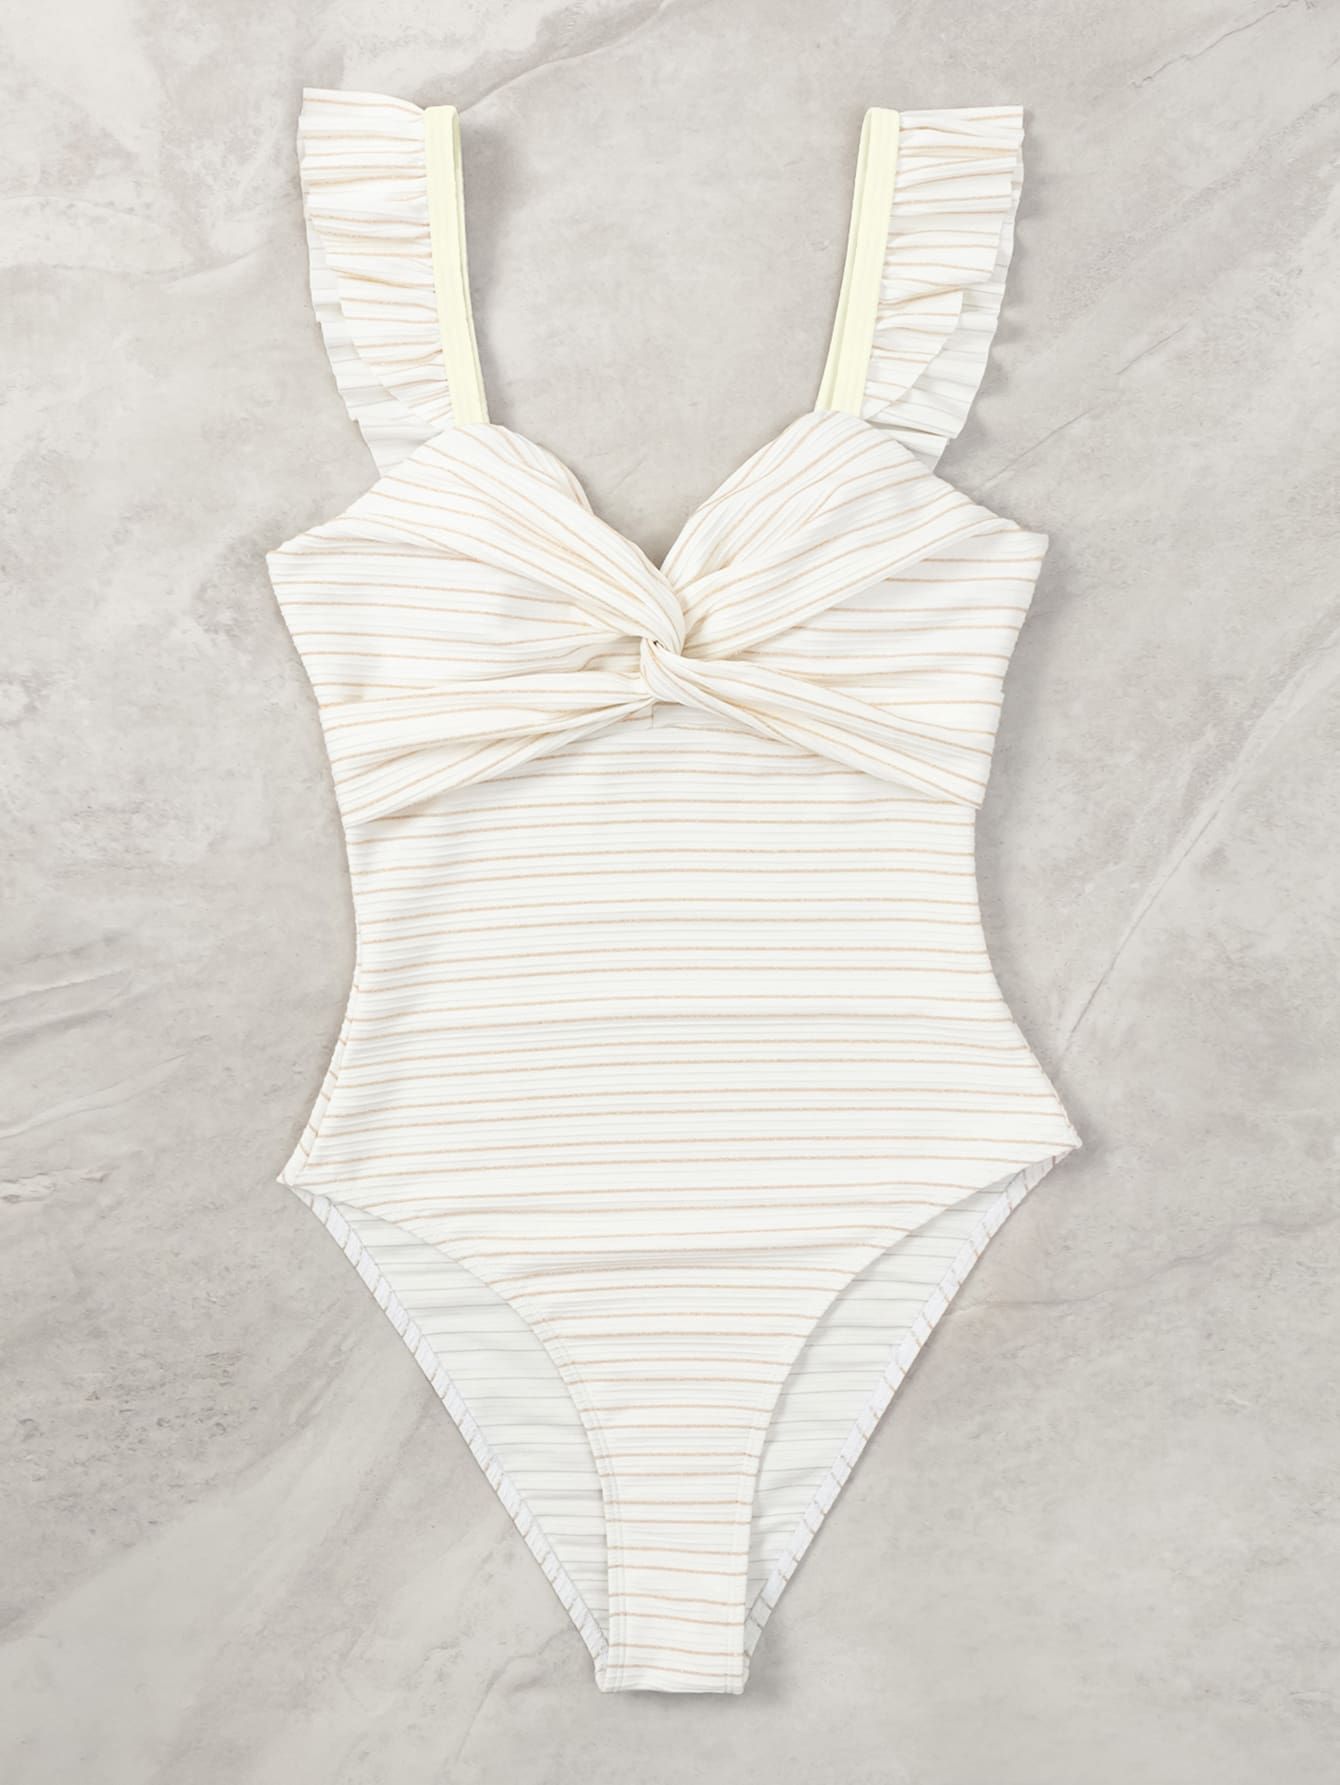 Striped Ruffle Trim Twist Front One Piece Swimsuit SKU: sw2302153530574986$10.30$9.79Join for an ... | SHEIN